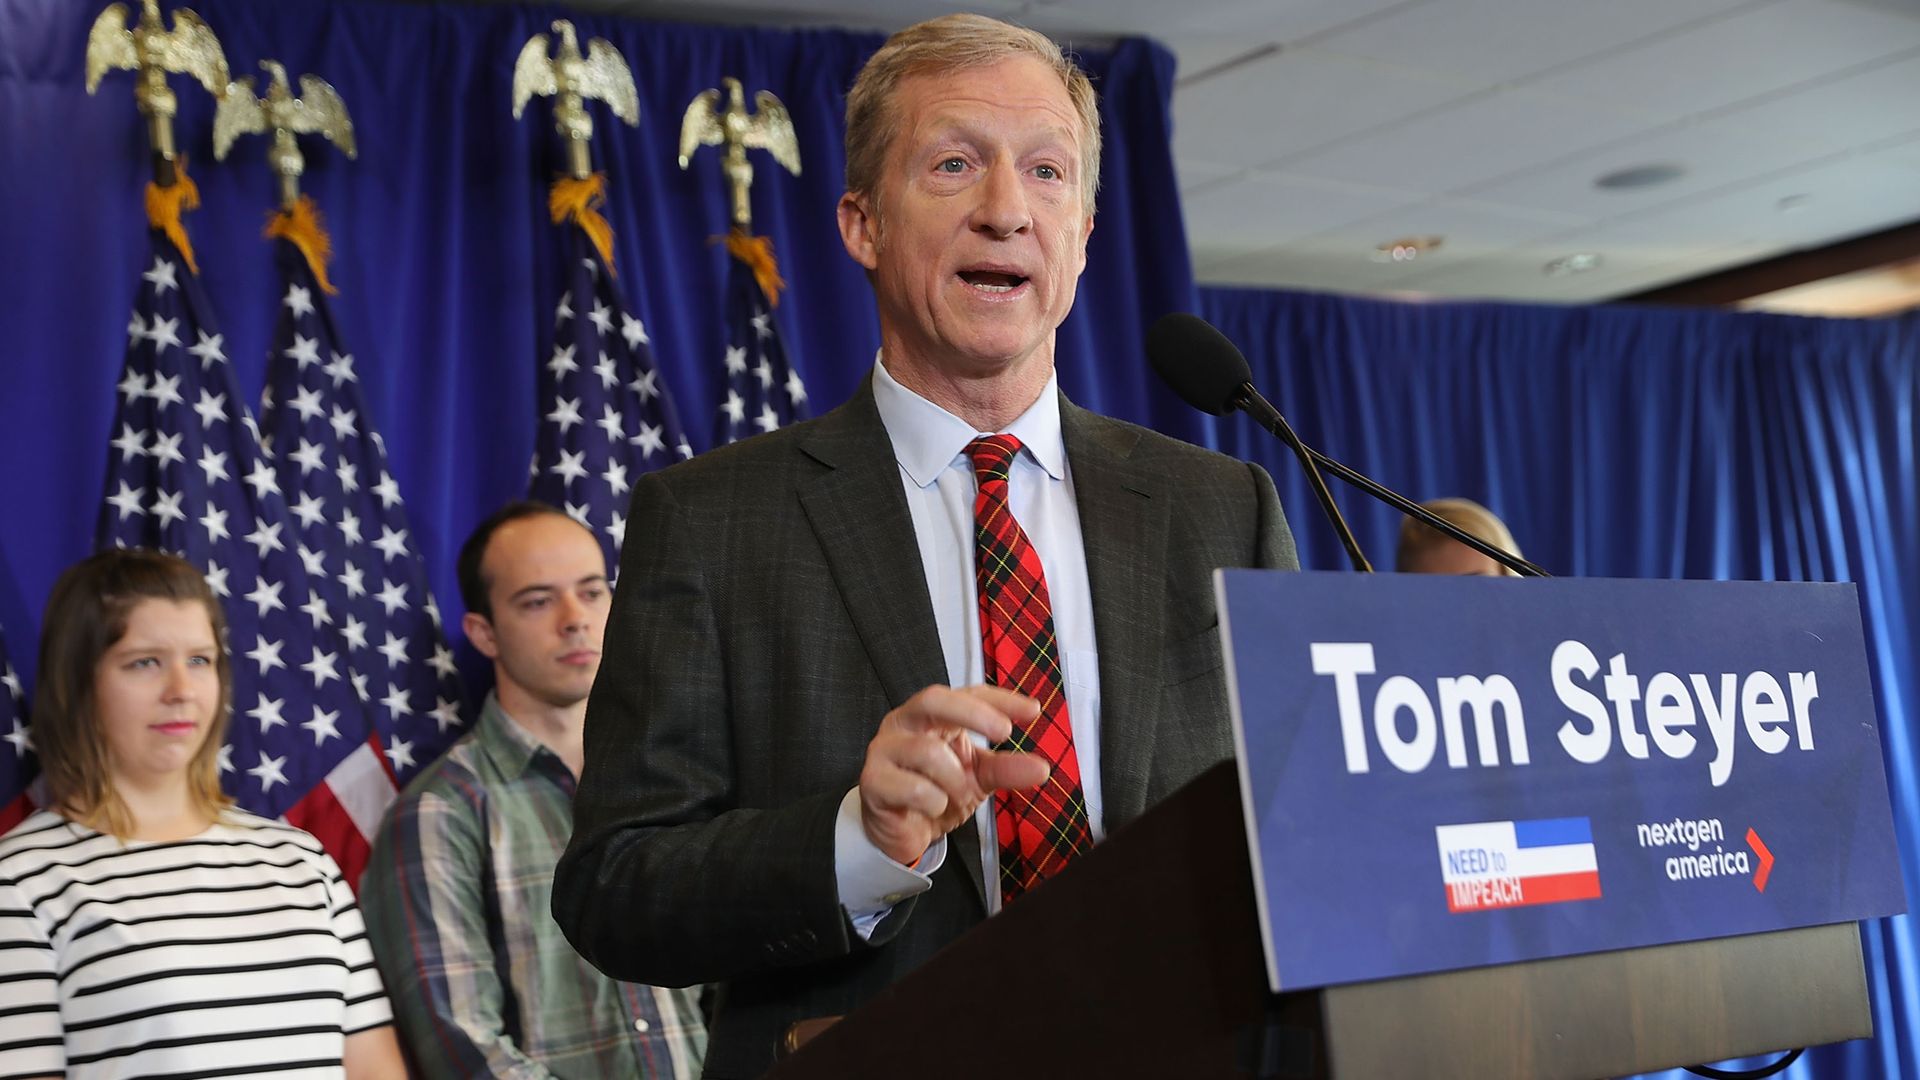 Tom Steyer speaks at an event in D.C.